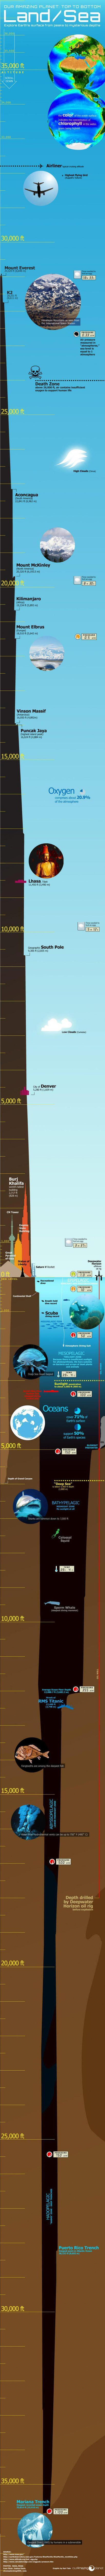 From the tallest mountain to the deepest ocean trench infographic